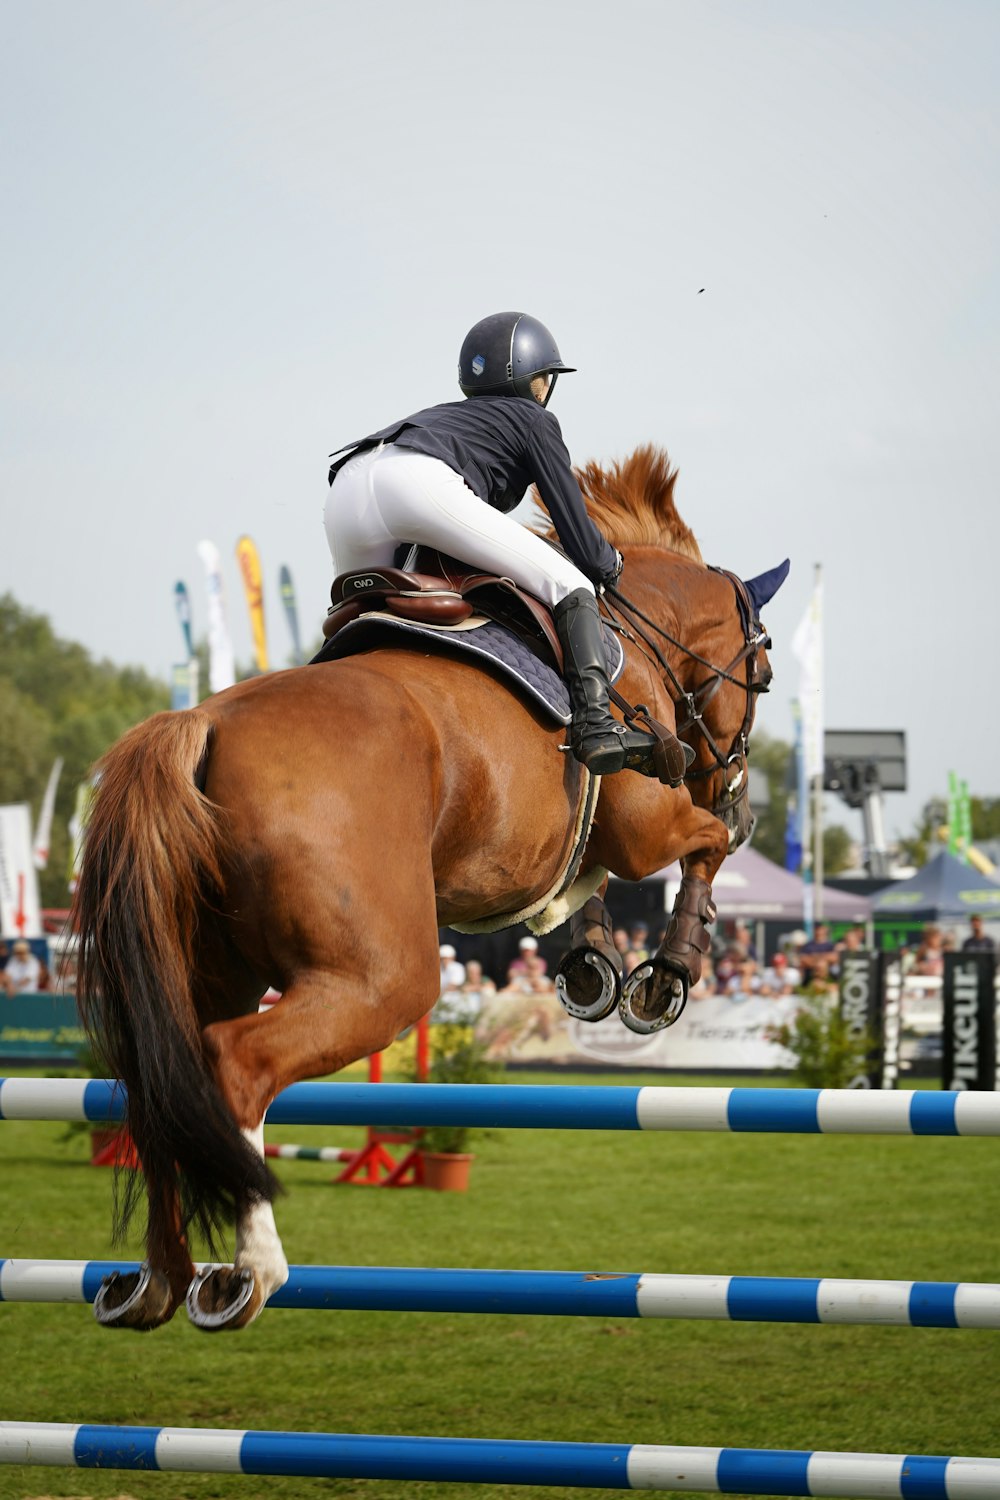 a person jumping a horse over an obstacle